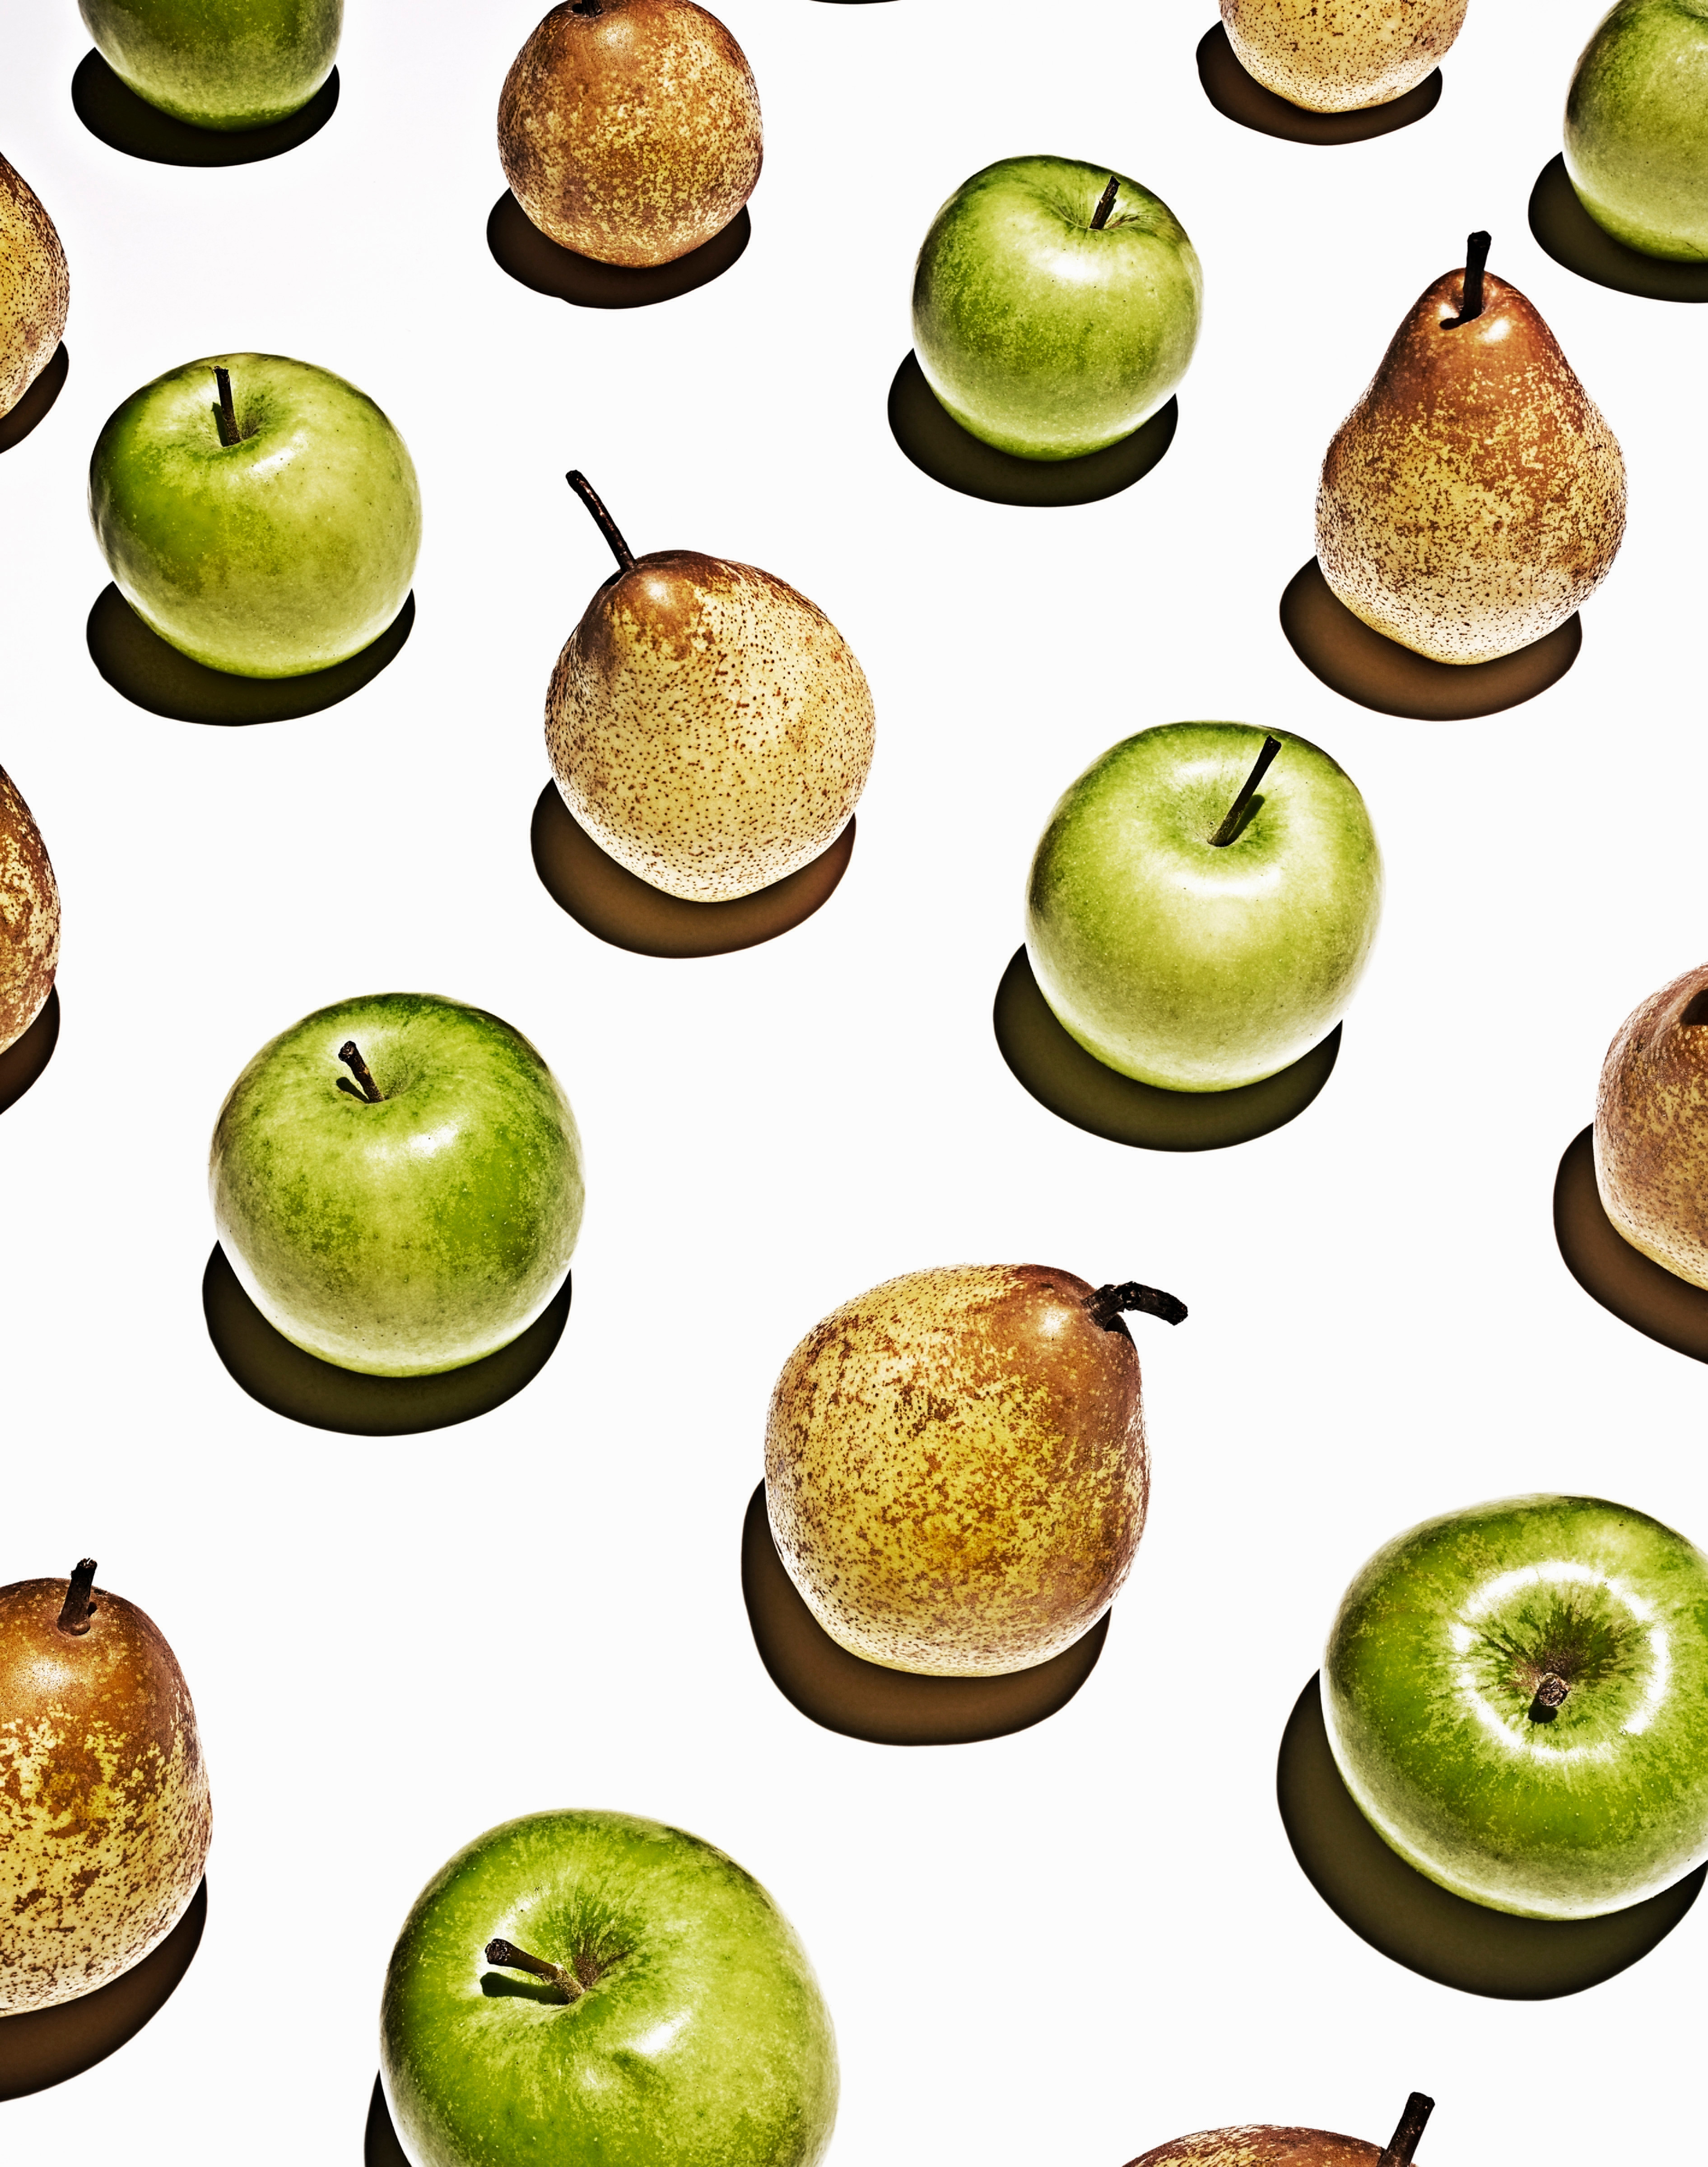 Apples and pears in grid pattern (Getty Images)